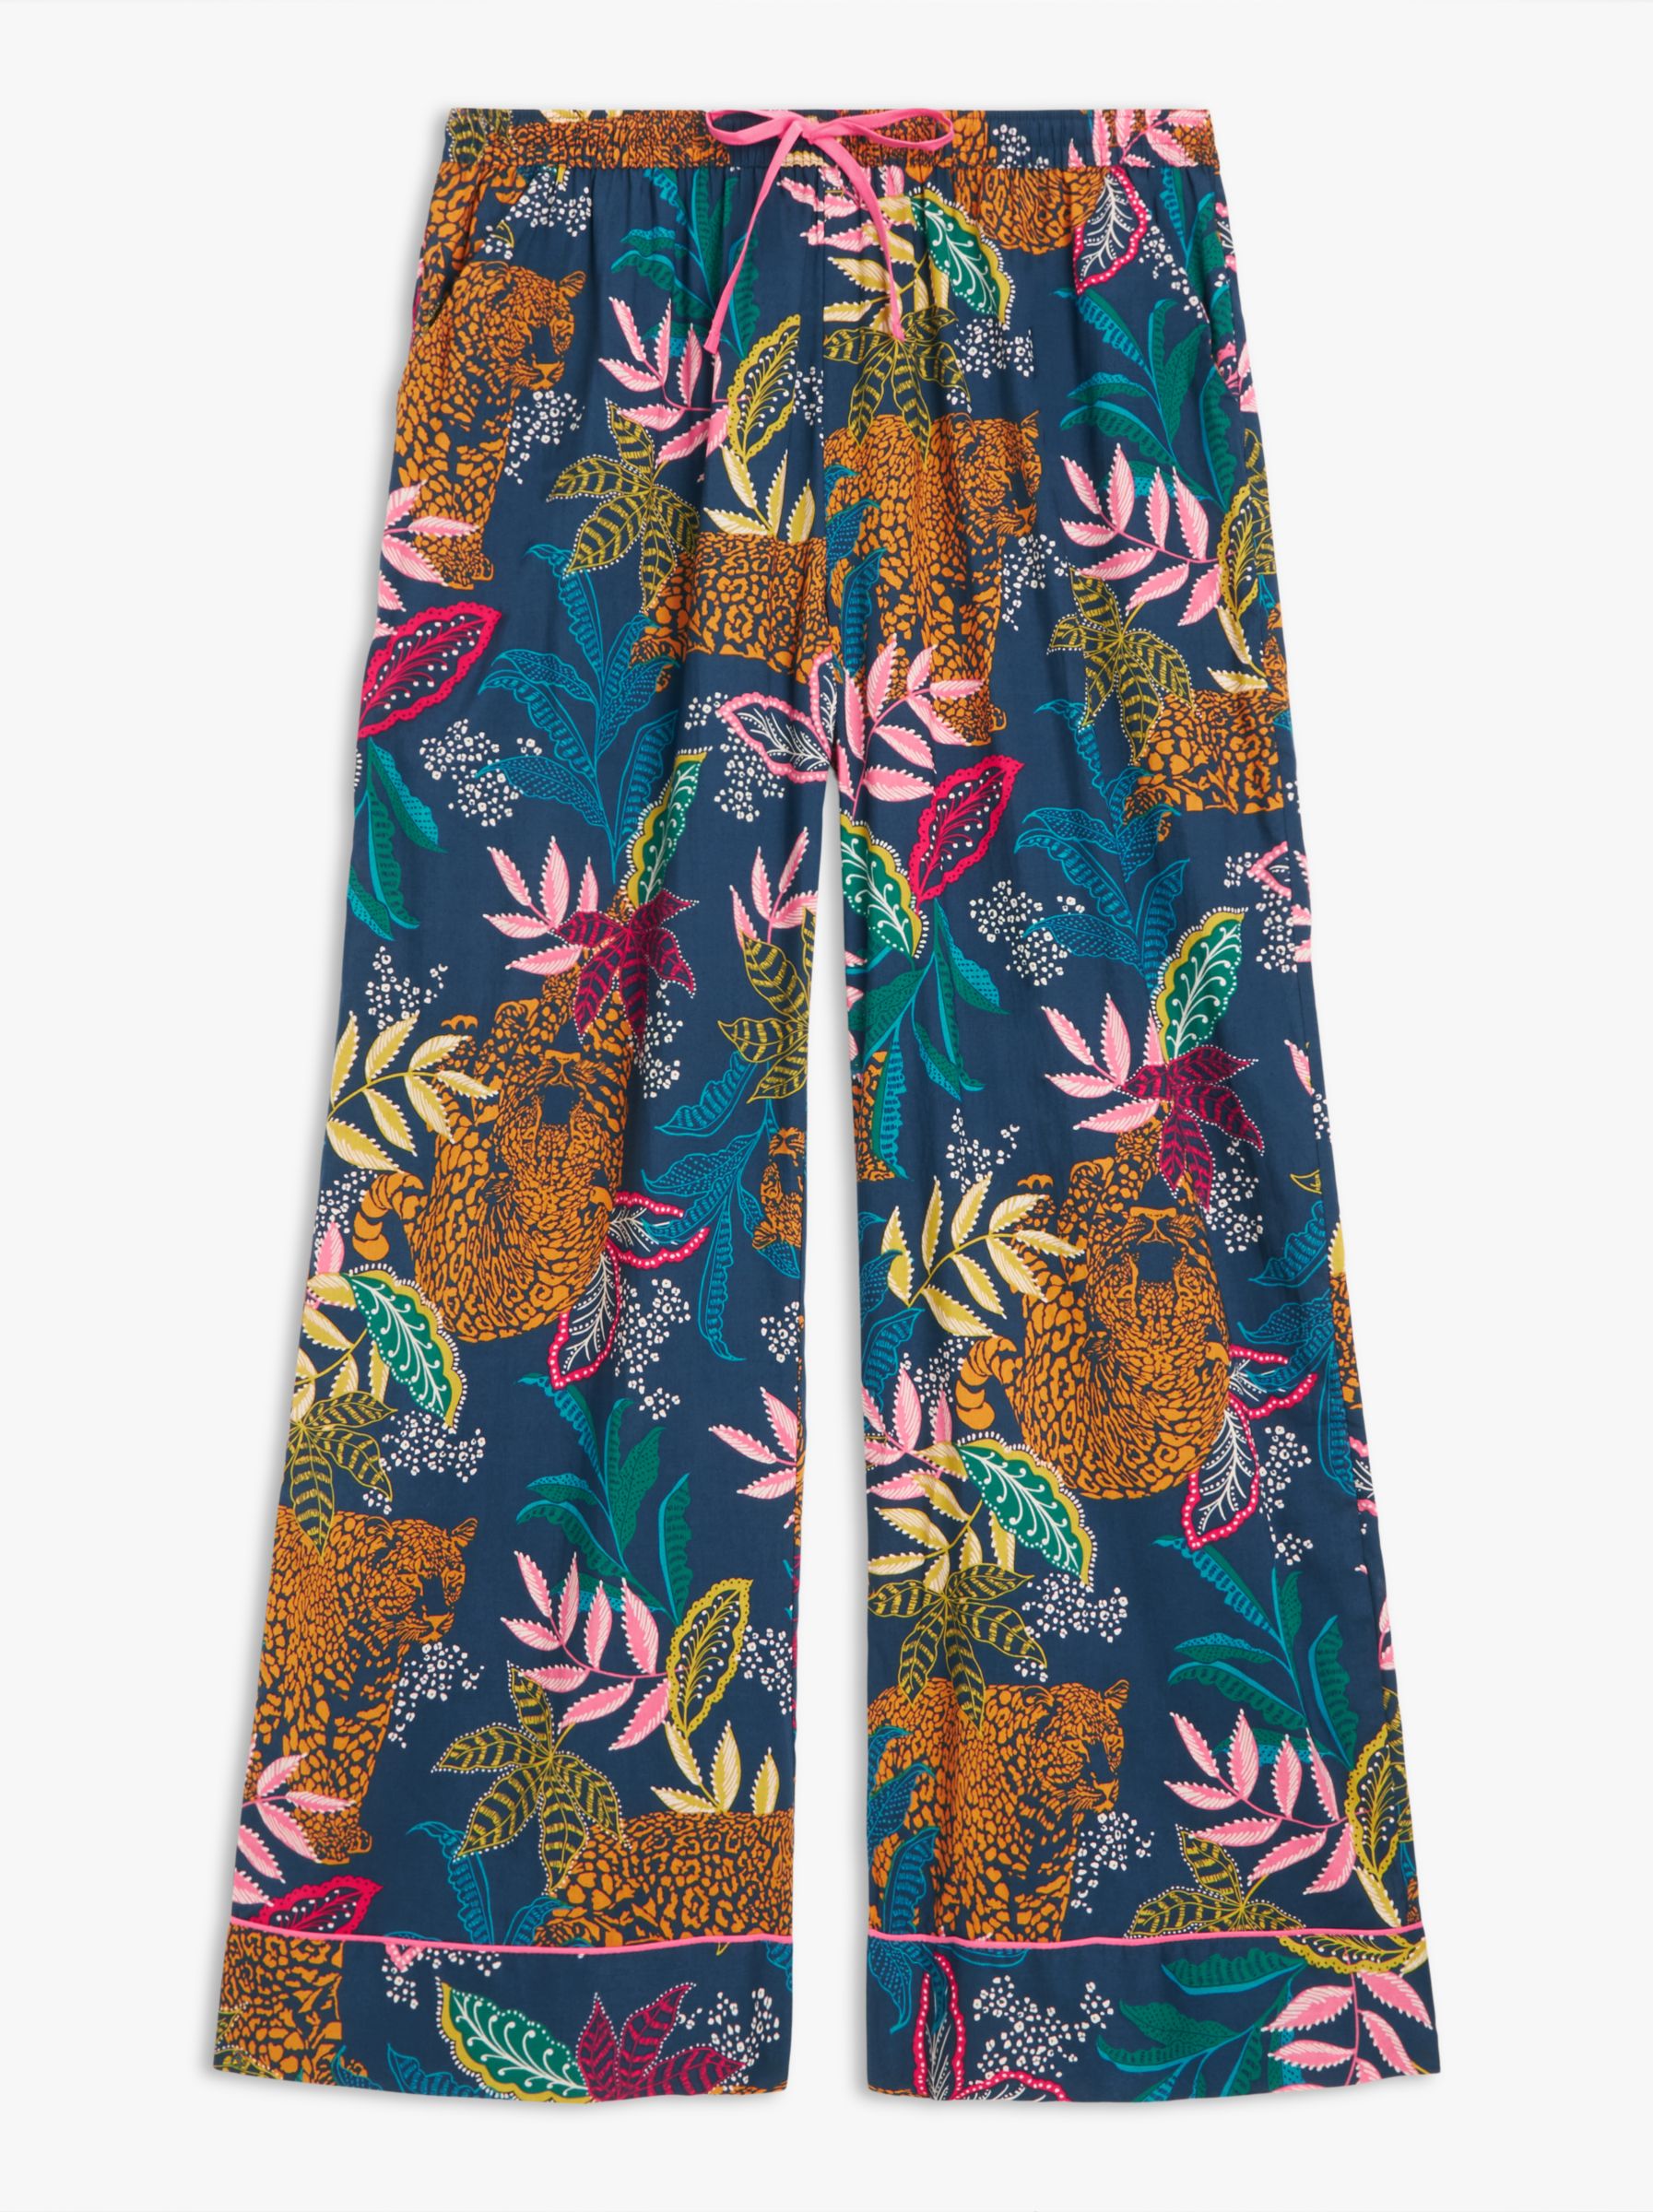 AND/OR Midnight Leopard Pyjama Bottoms, Green/Multi at John Lewis ...